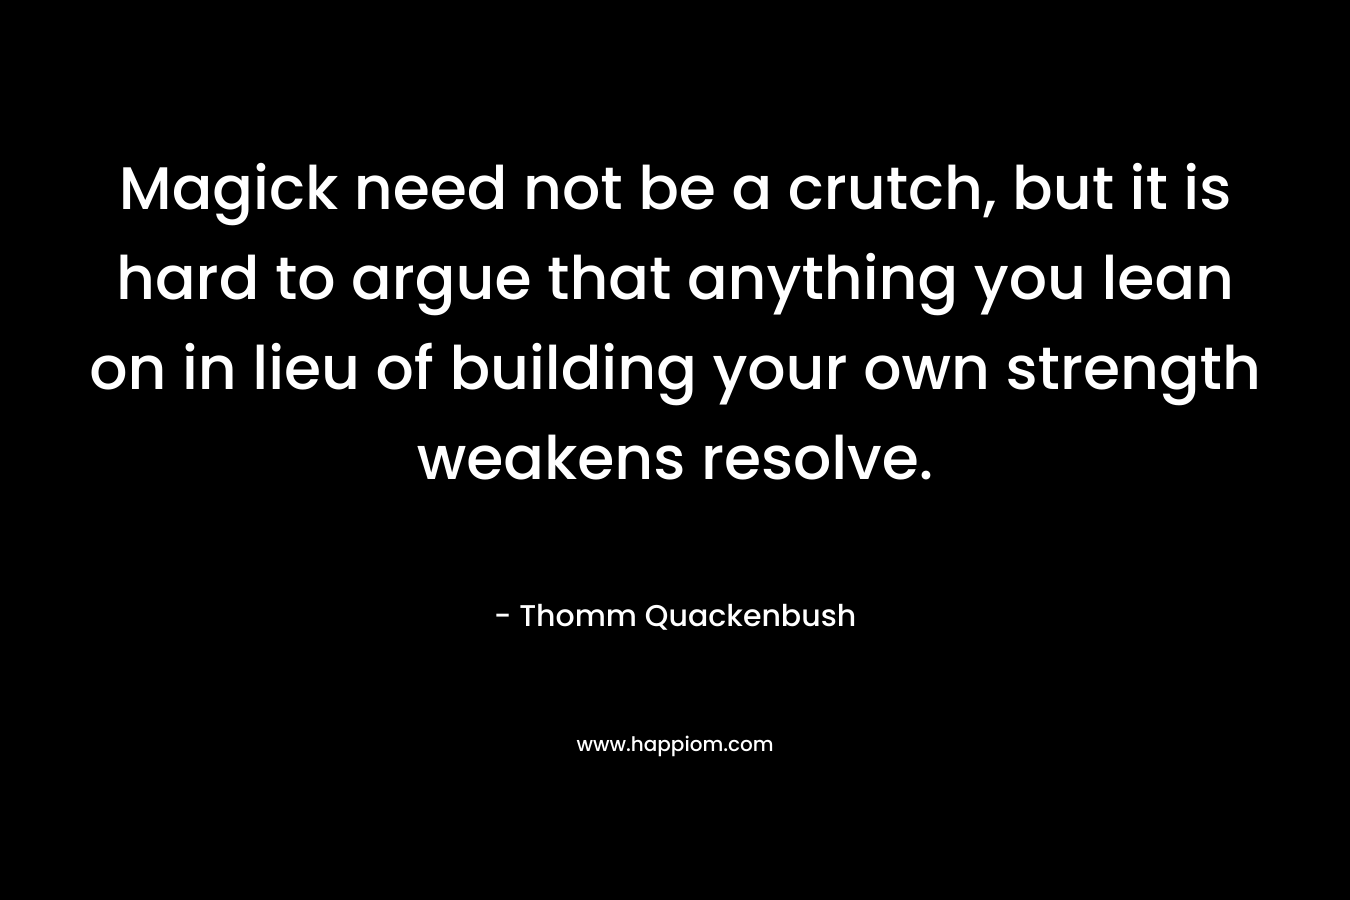 Magick need not be a crutch, but it is hard to argue that anything you lean on in lieu of building your own strength weakens resolve. – Thomm Quackenbush